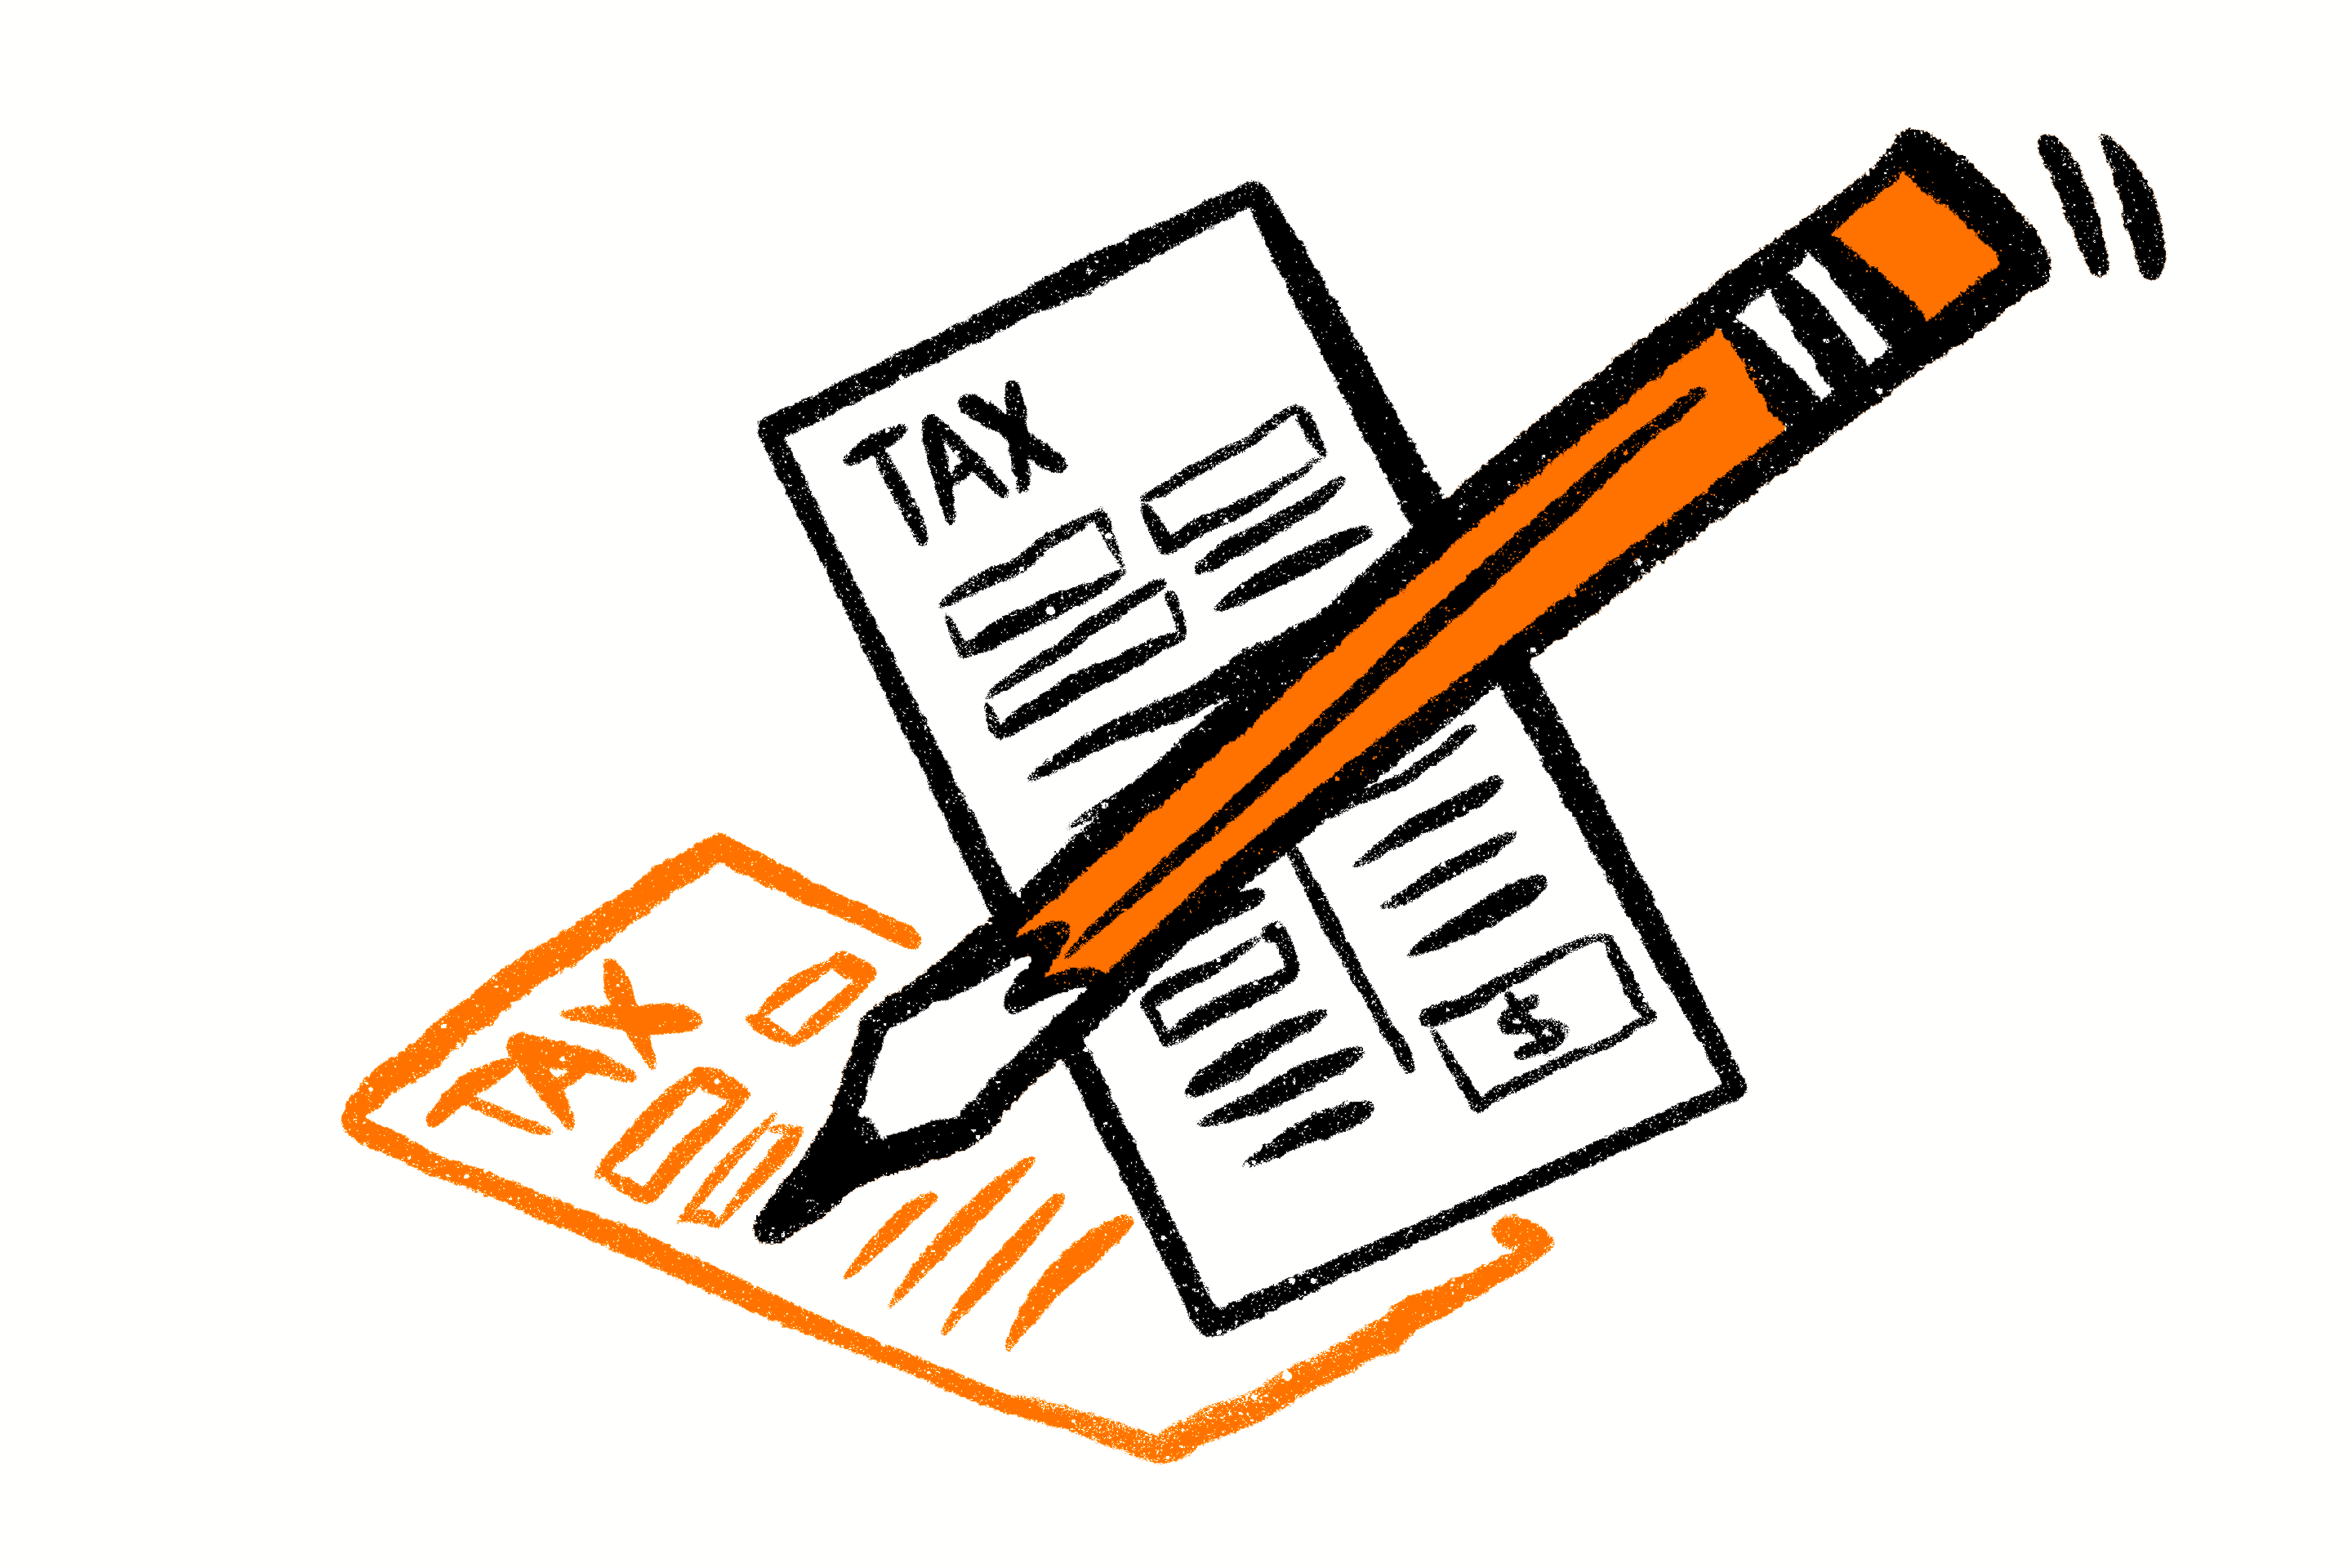 Two tax forms, one fully behind a pencil and the other being written on by it.